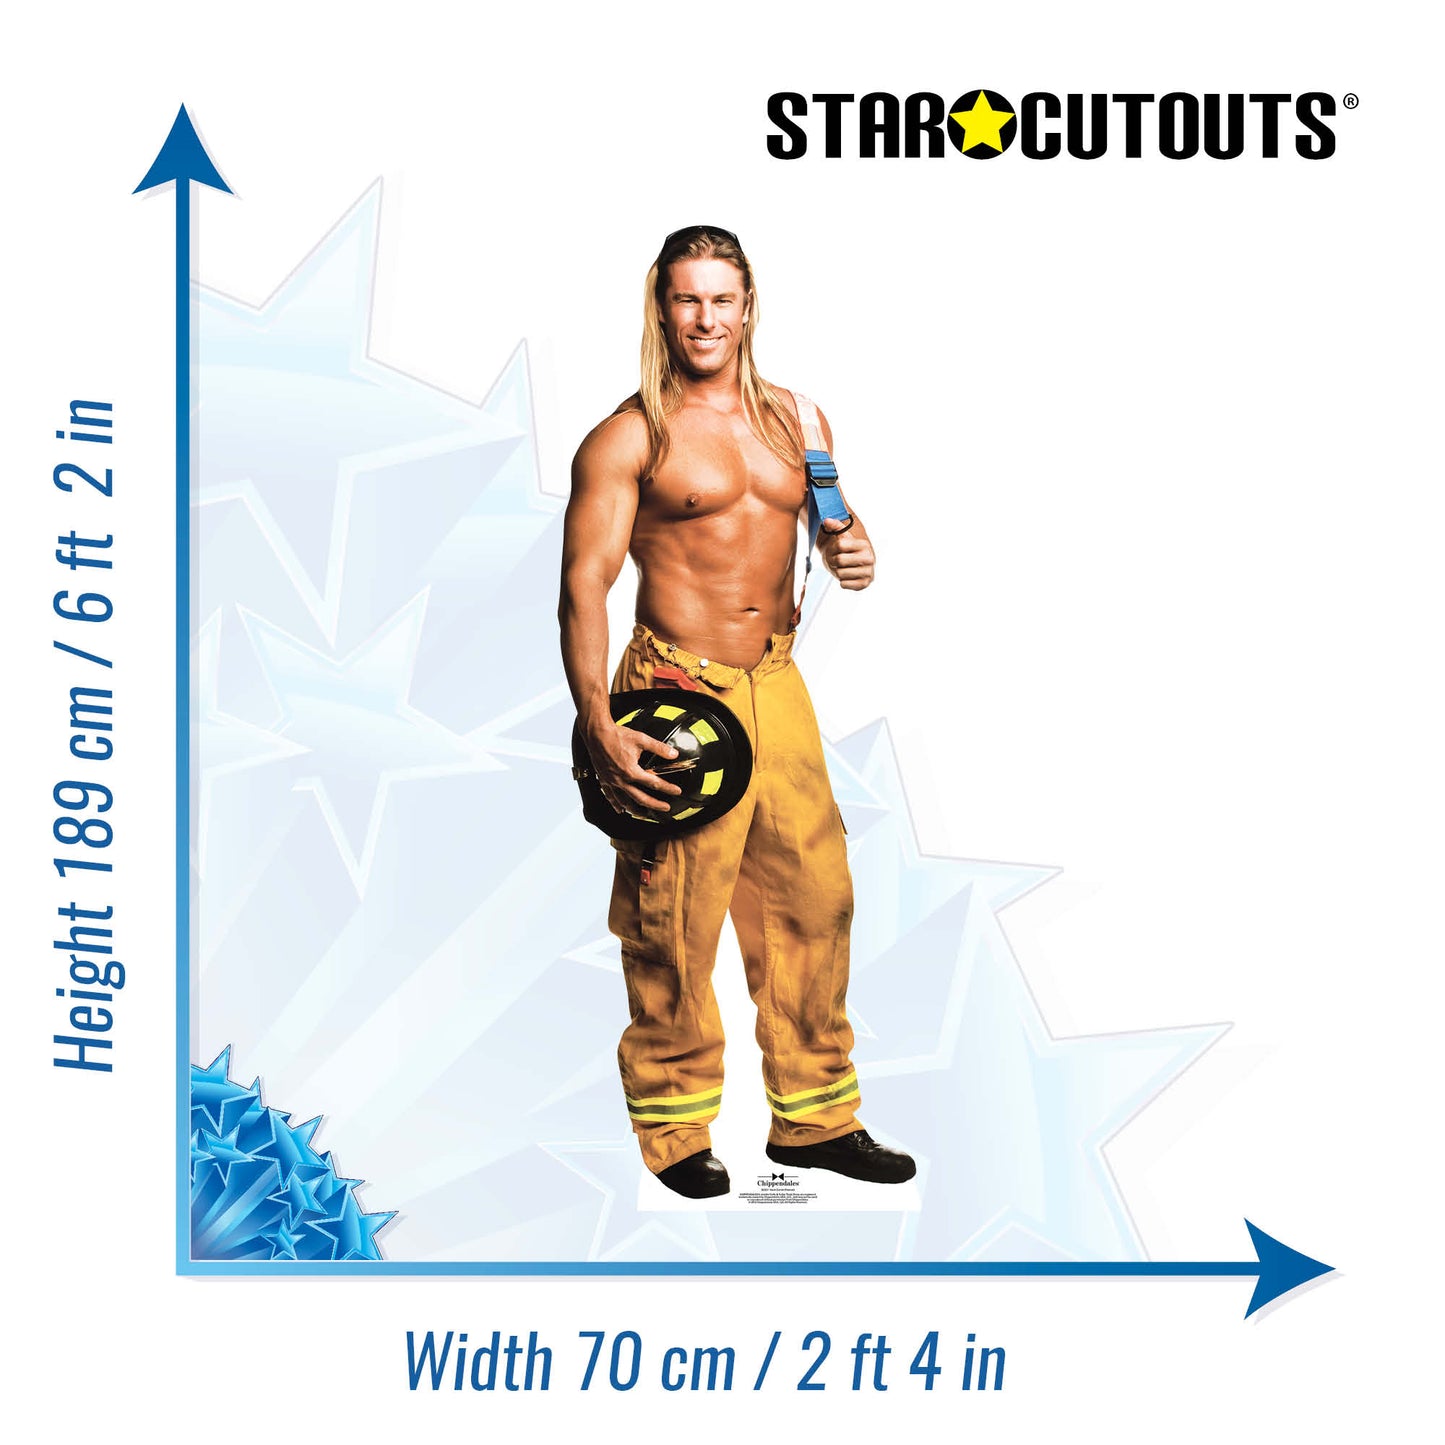 SC531 Kevin  Fireman  Chippendales Cardboard Cut Out Height 189cm - Star Cutouts